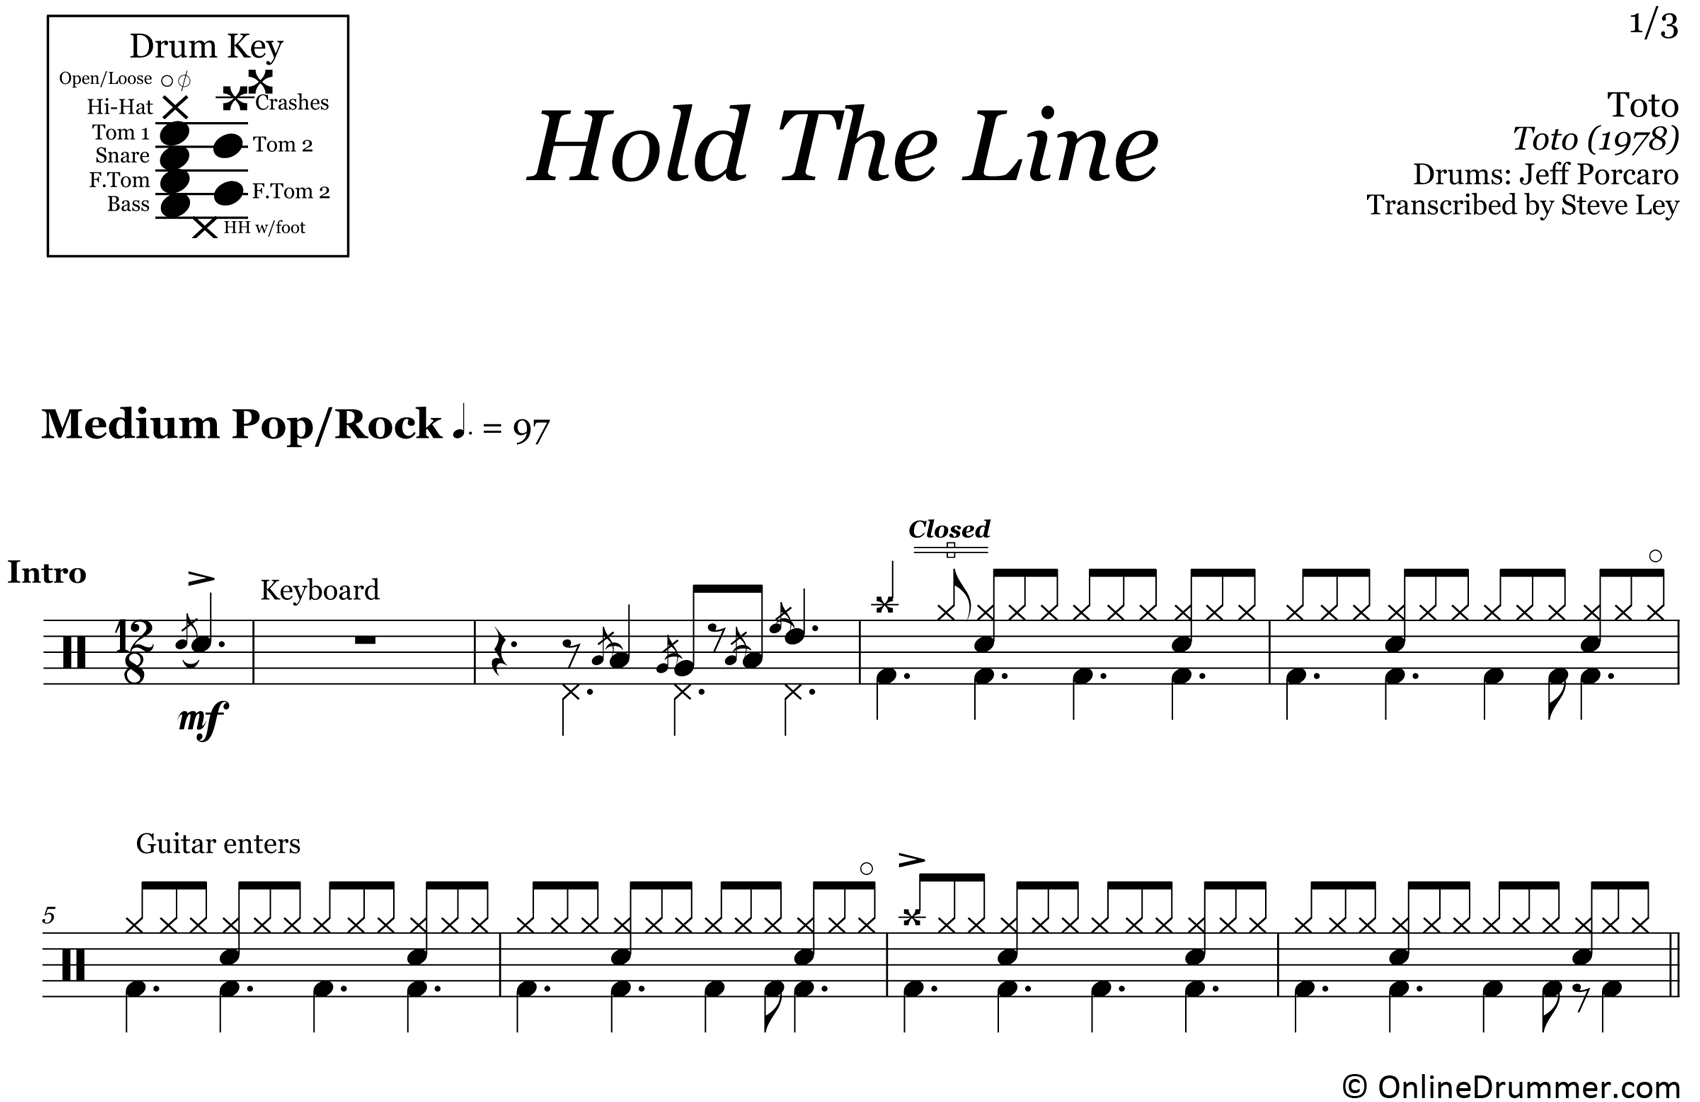 Hold The Line - Toto - Drum Sheet Music